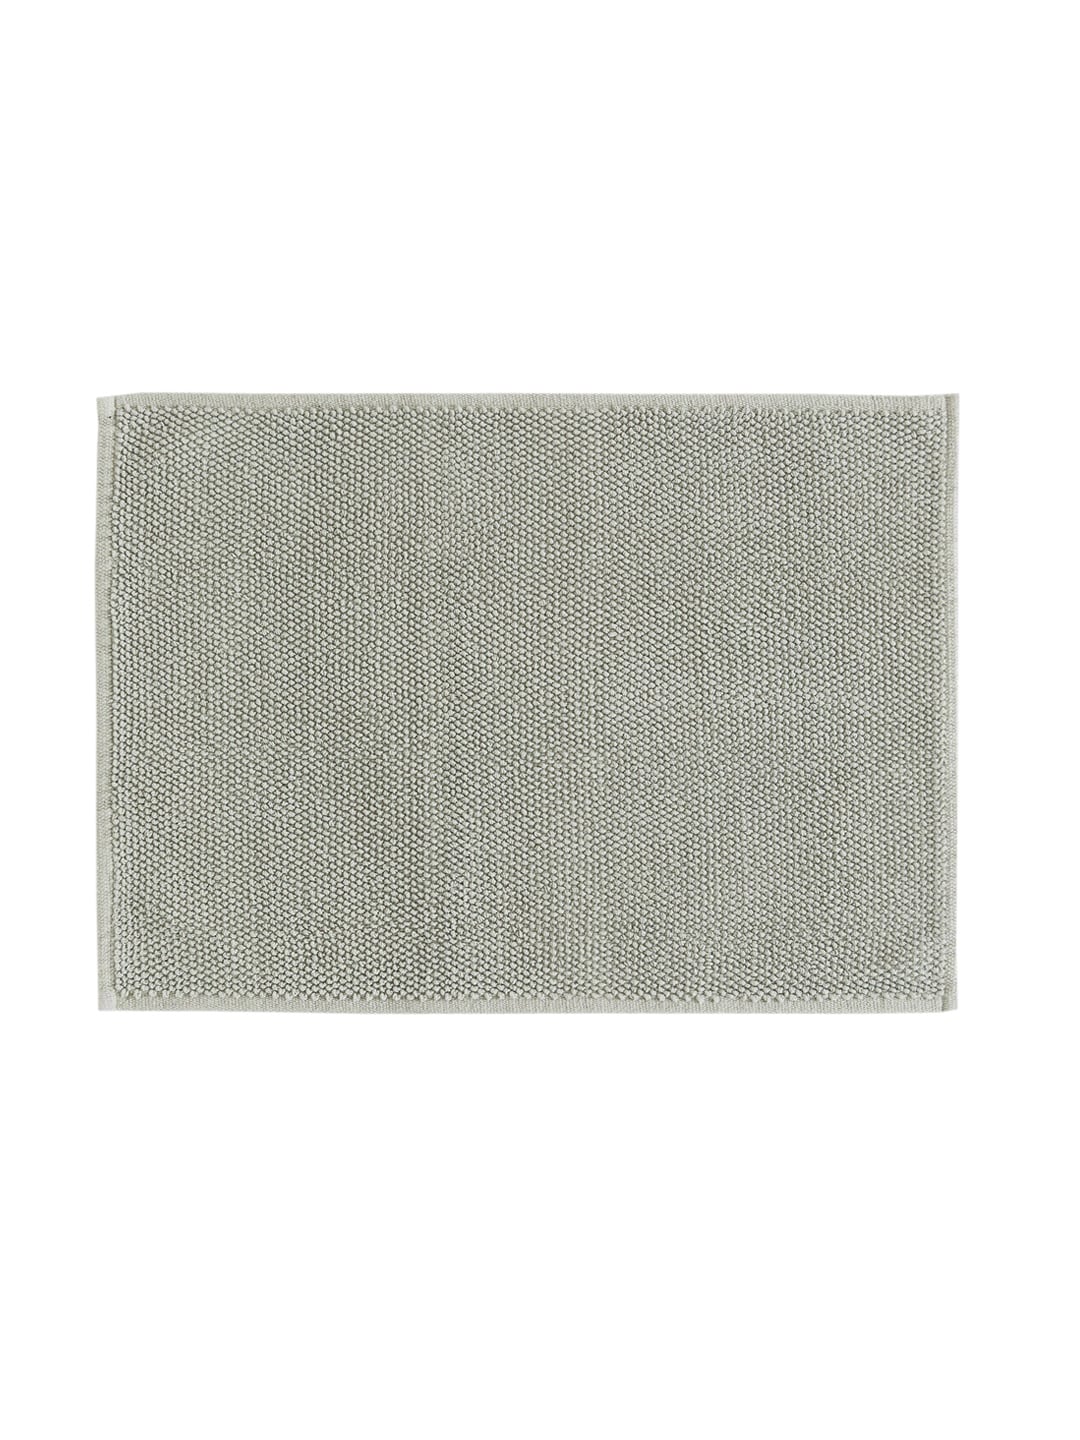 H&M Green Solid Cotton Bath Mat Price in India